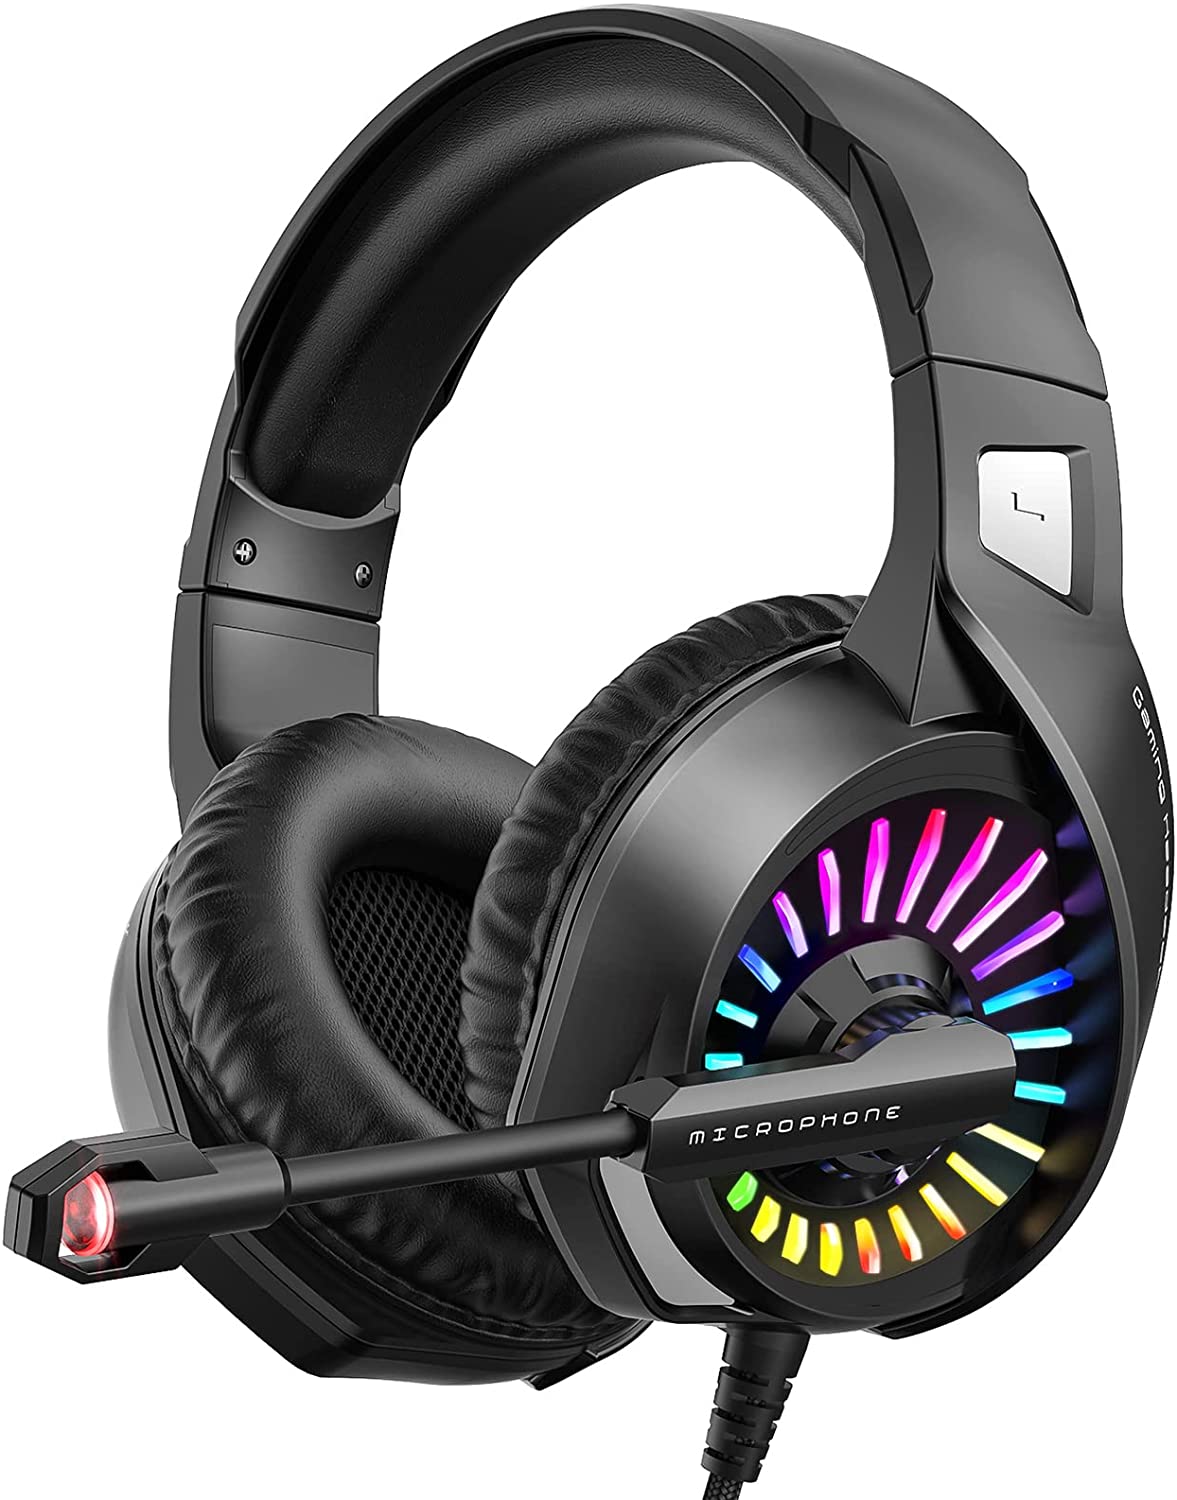 8. ZIUMIER Gaming Headset with Microphone